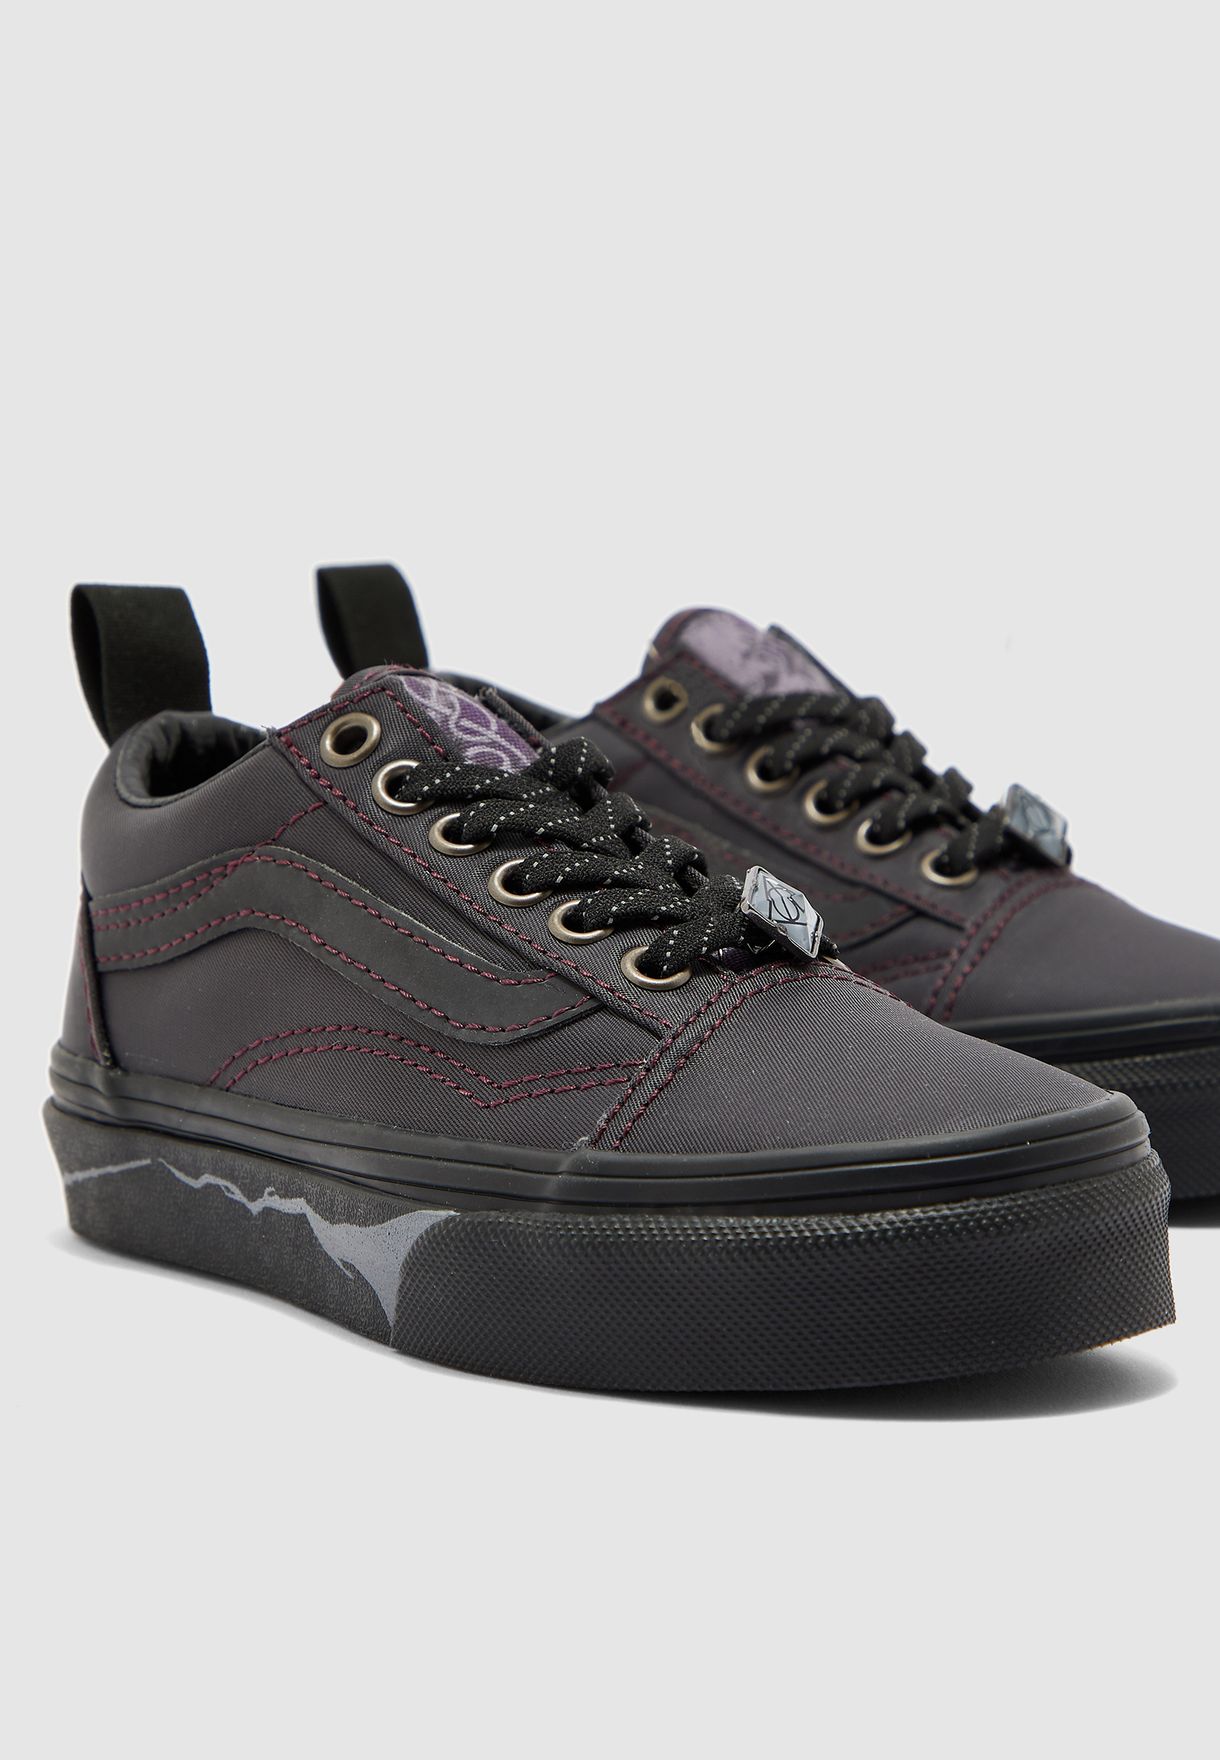 deathly hallows vans shoes